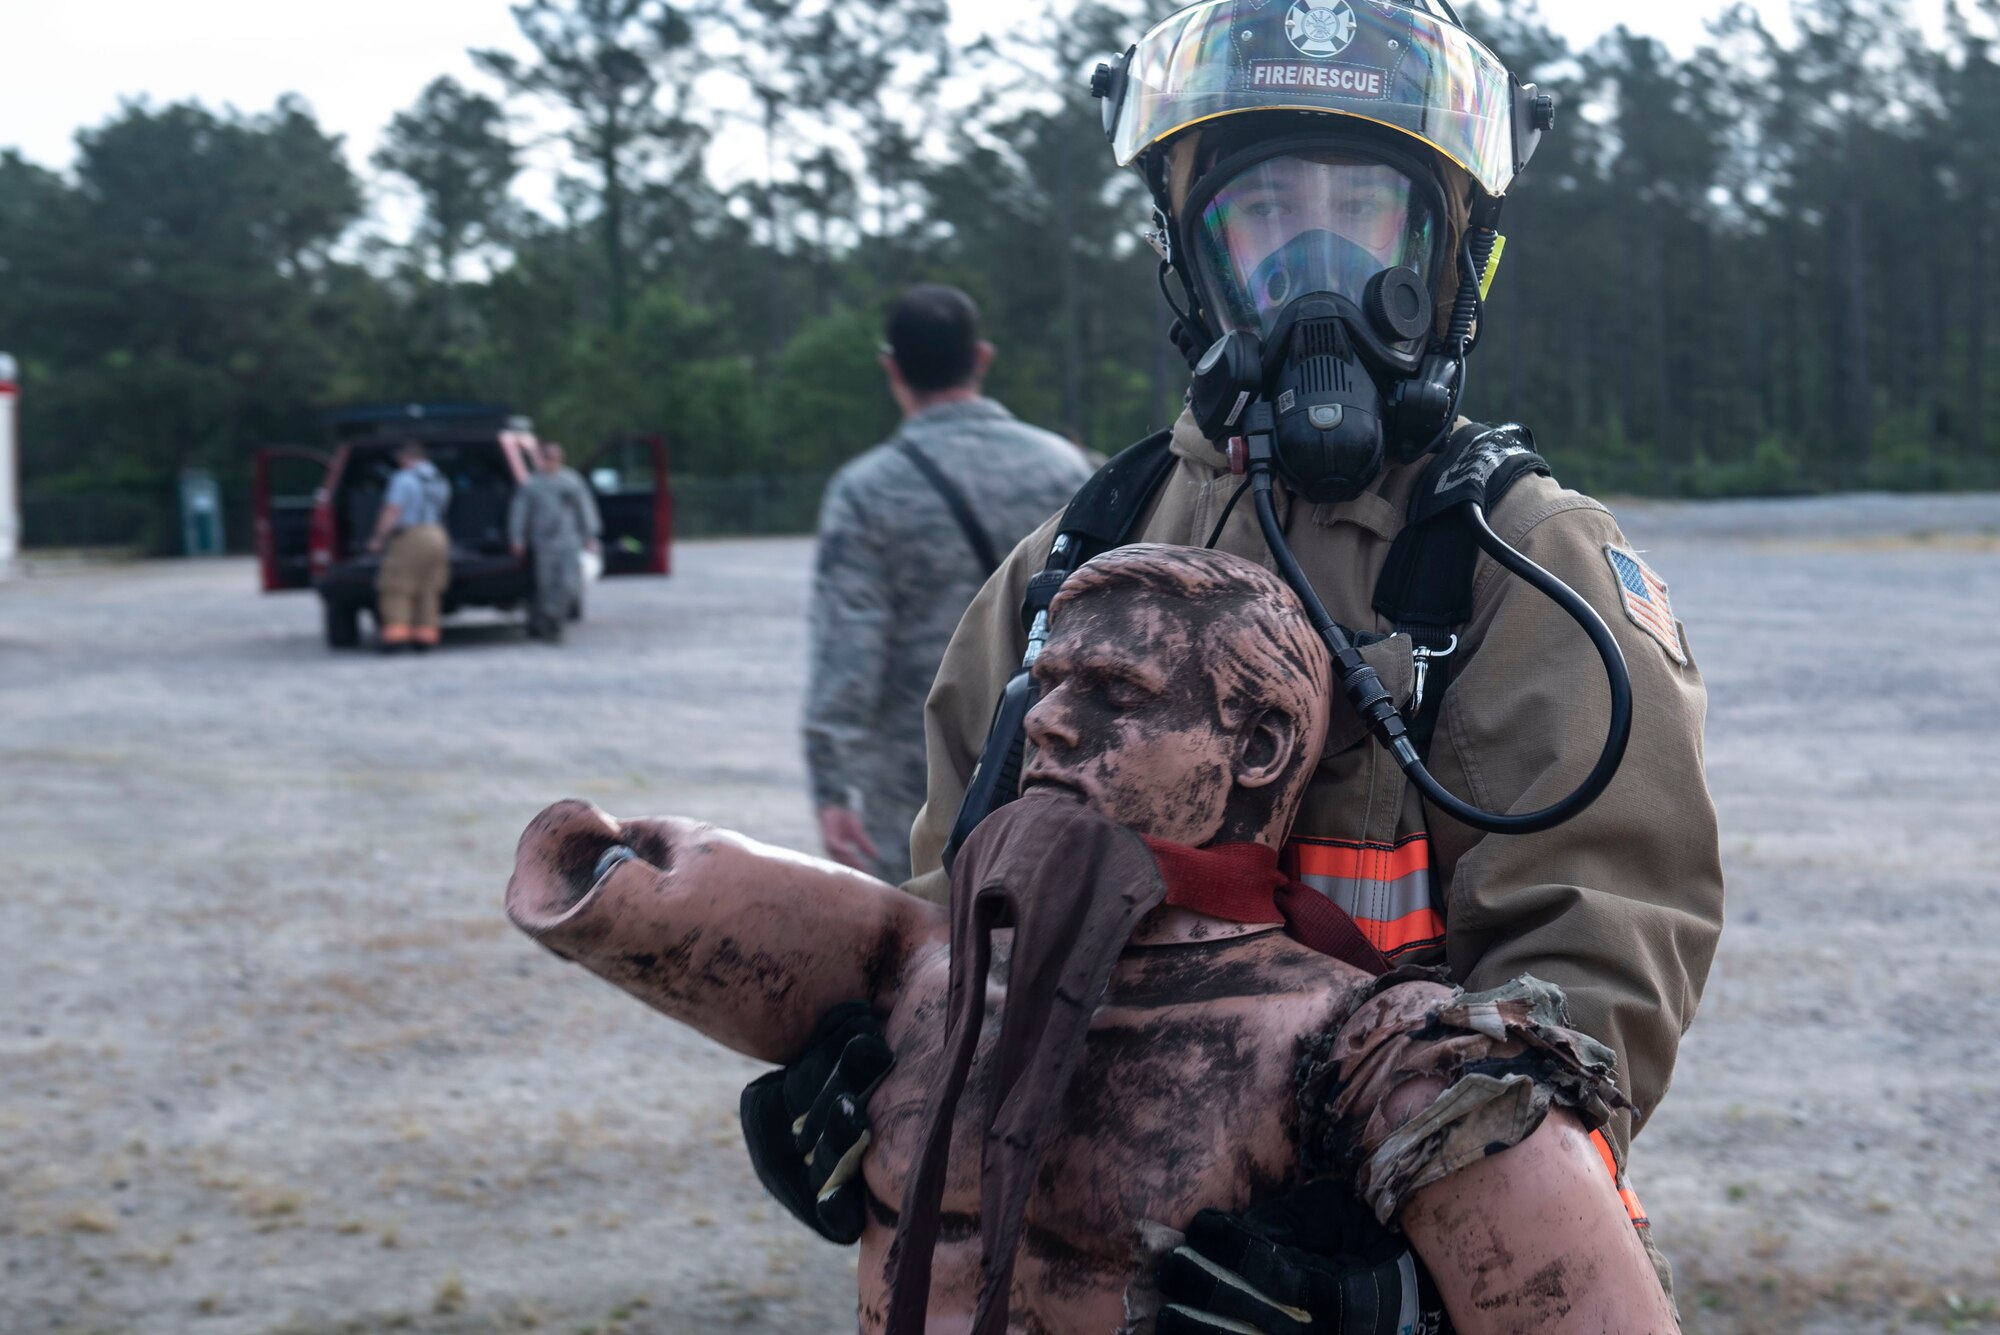 A U.S. Air Force 20th Civil Engineer Squadron firefighter carries a simulated casualty away from a chemical and explosives lab during an exercise at Shaw Air Force Base, S.C., May 2, 2019.